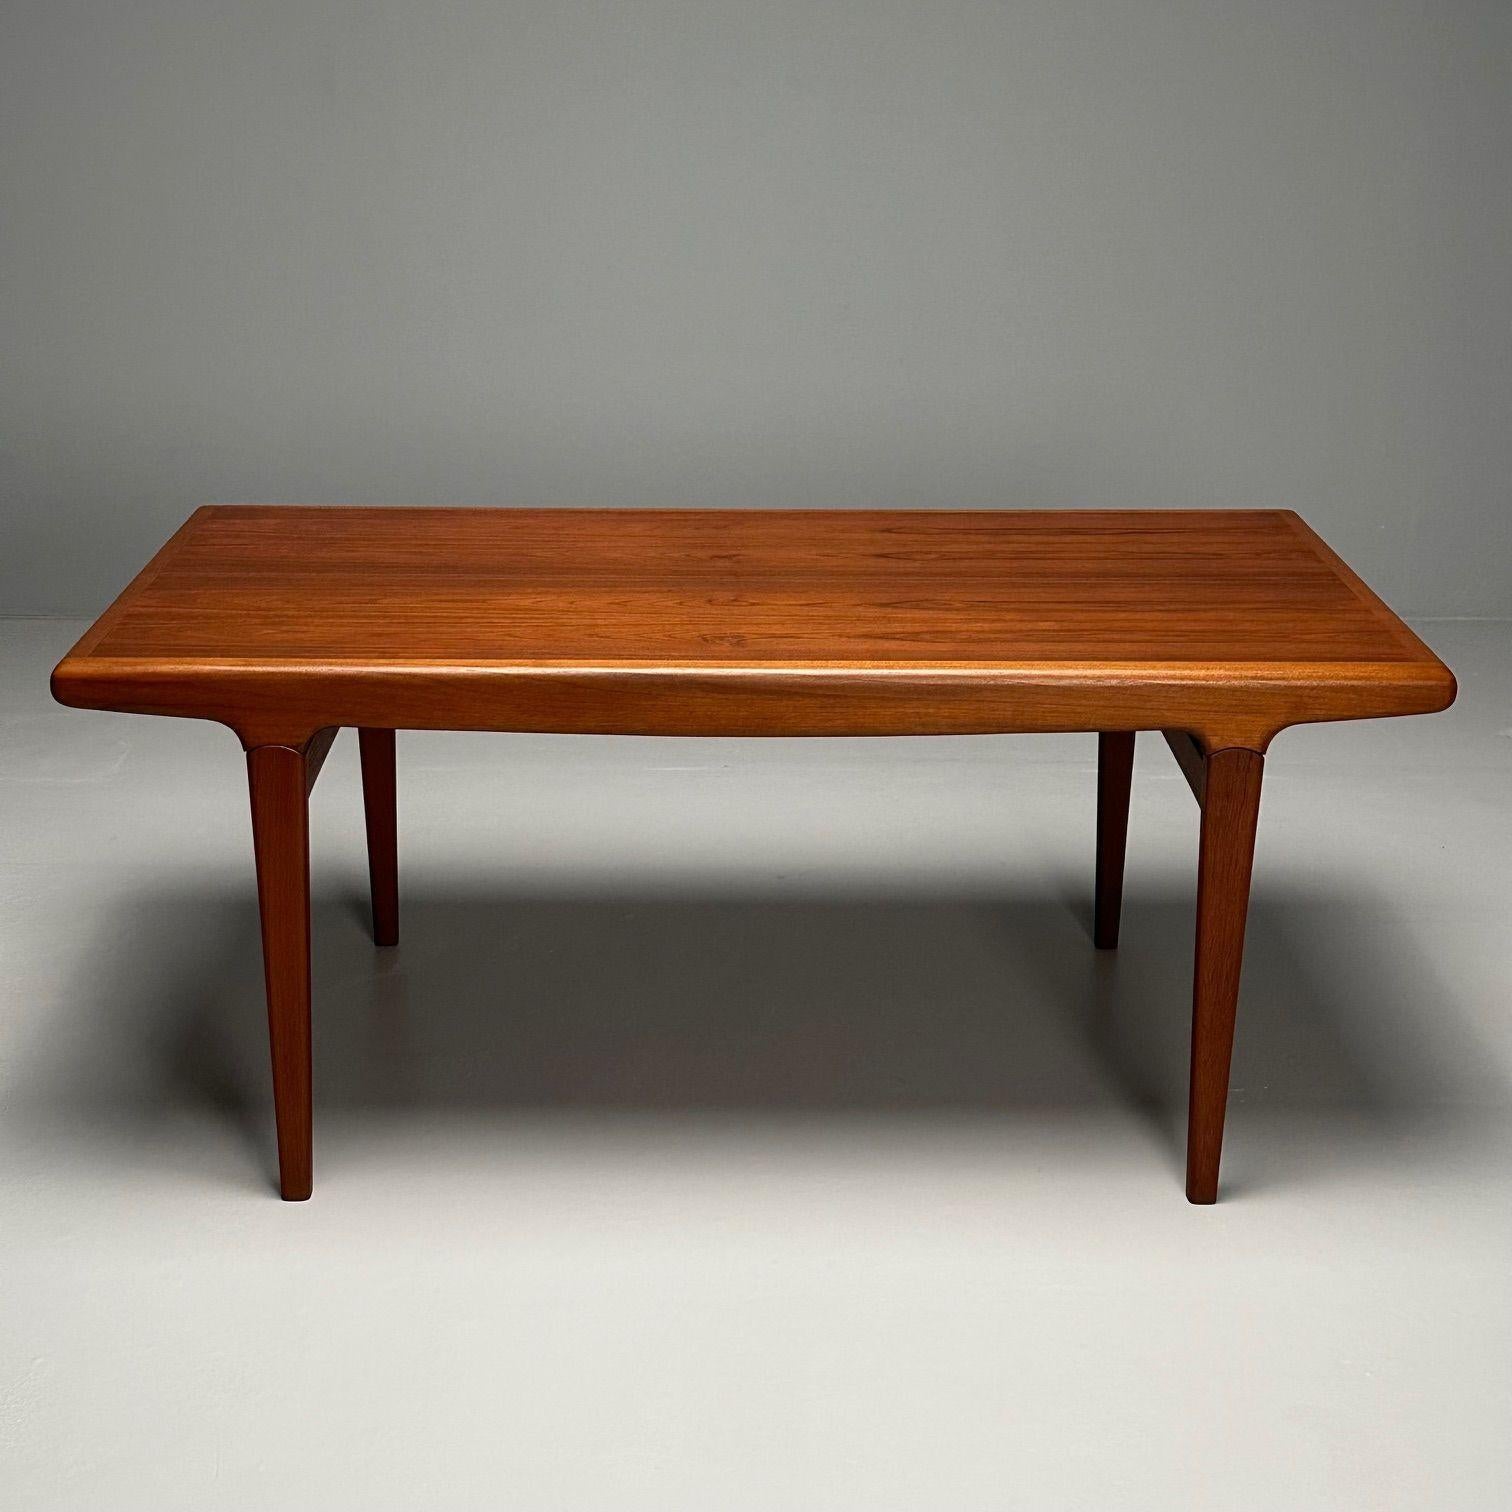 Johannes Andersen, Danish Mid-Century Modern, Hidden Leaf Dining Table, Teak, Denmark, 1960s

A fully refinished dining table designed by renowned Danish designer Johannes Andersen and produced in Denmark, circa 1960s. The table features a unique